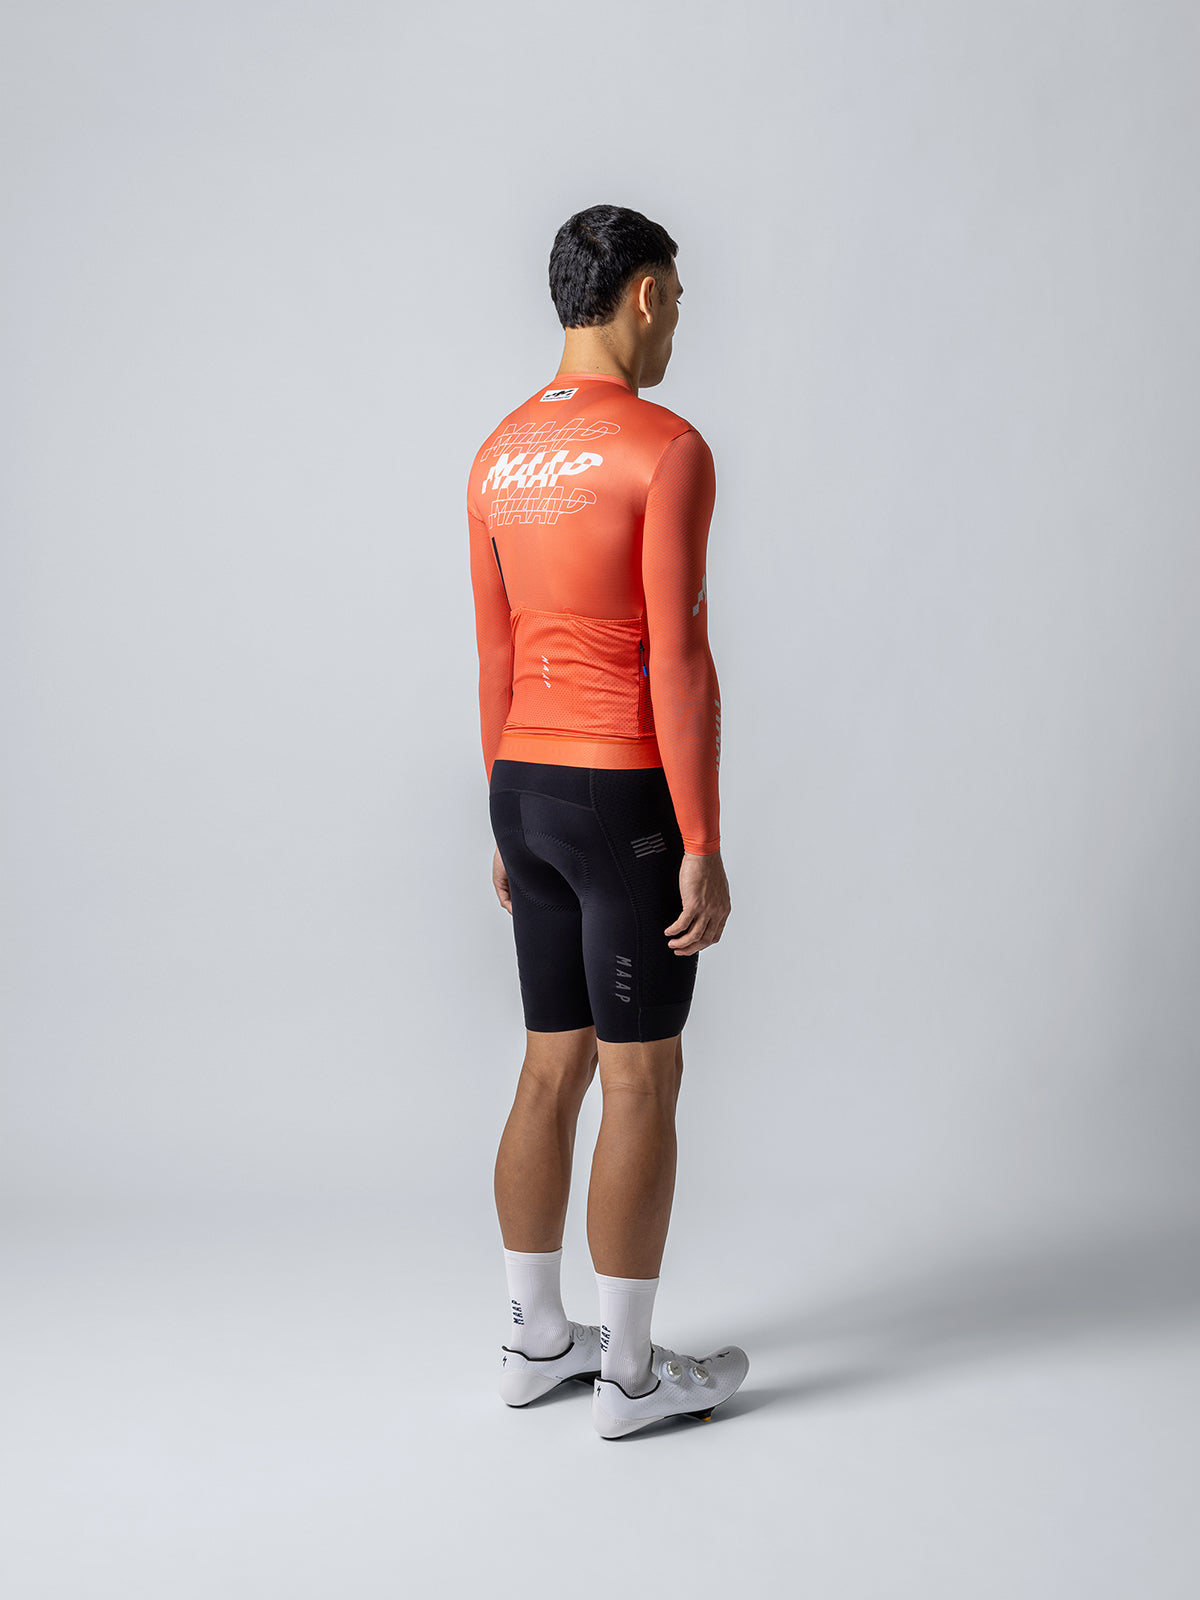 Fragment Pro Air LS Jersey 2.0 - MAAP Cycling Apparel